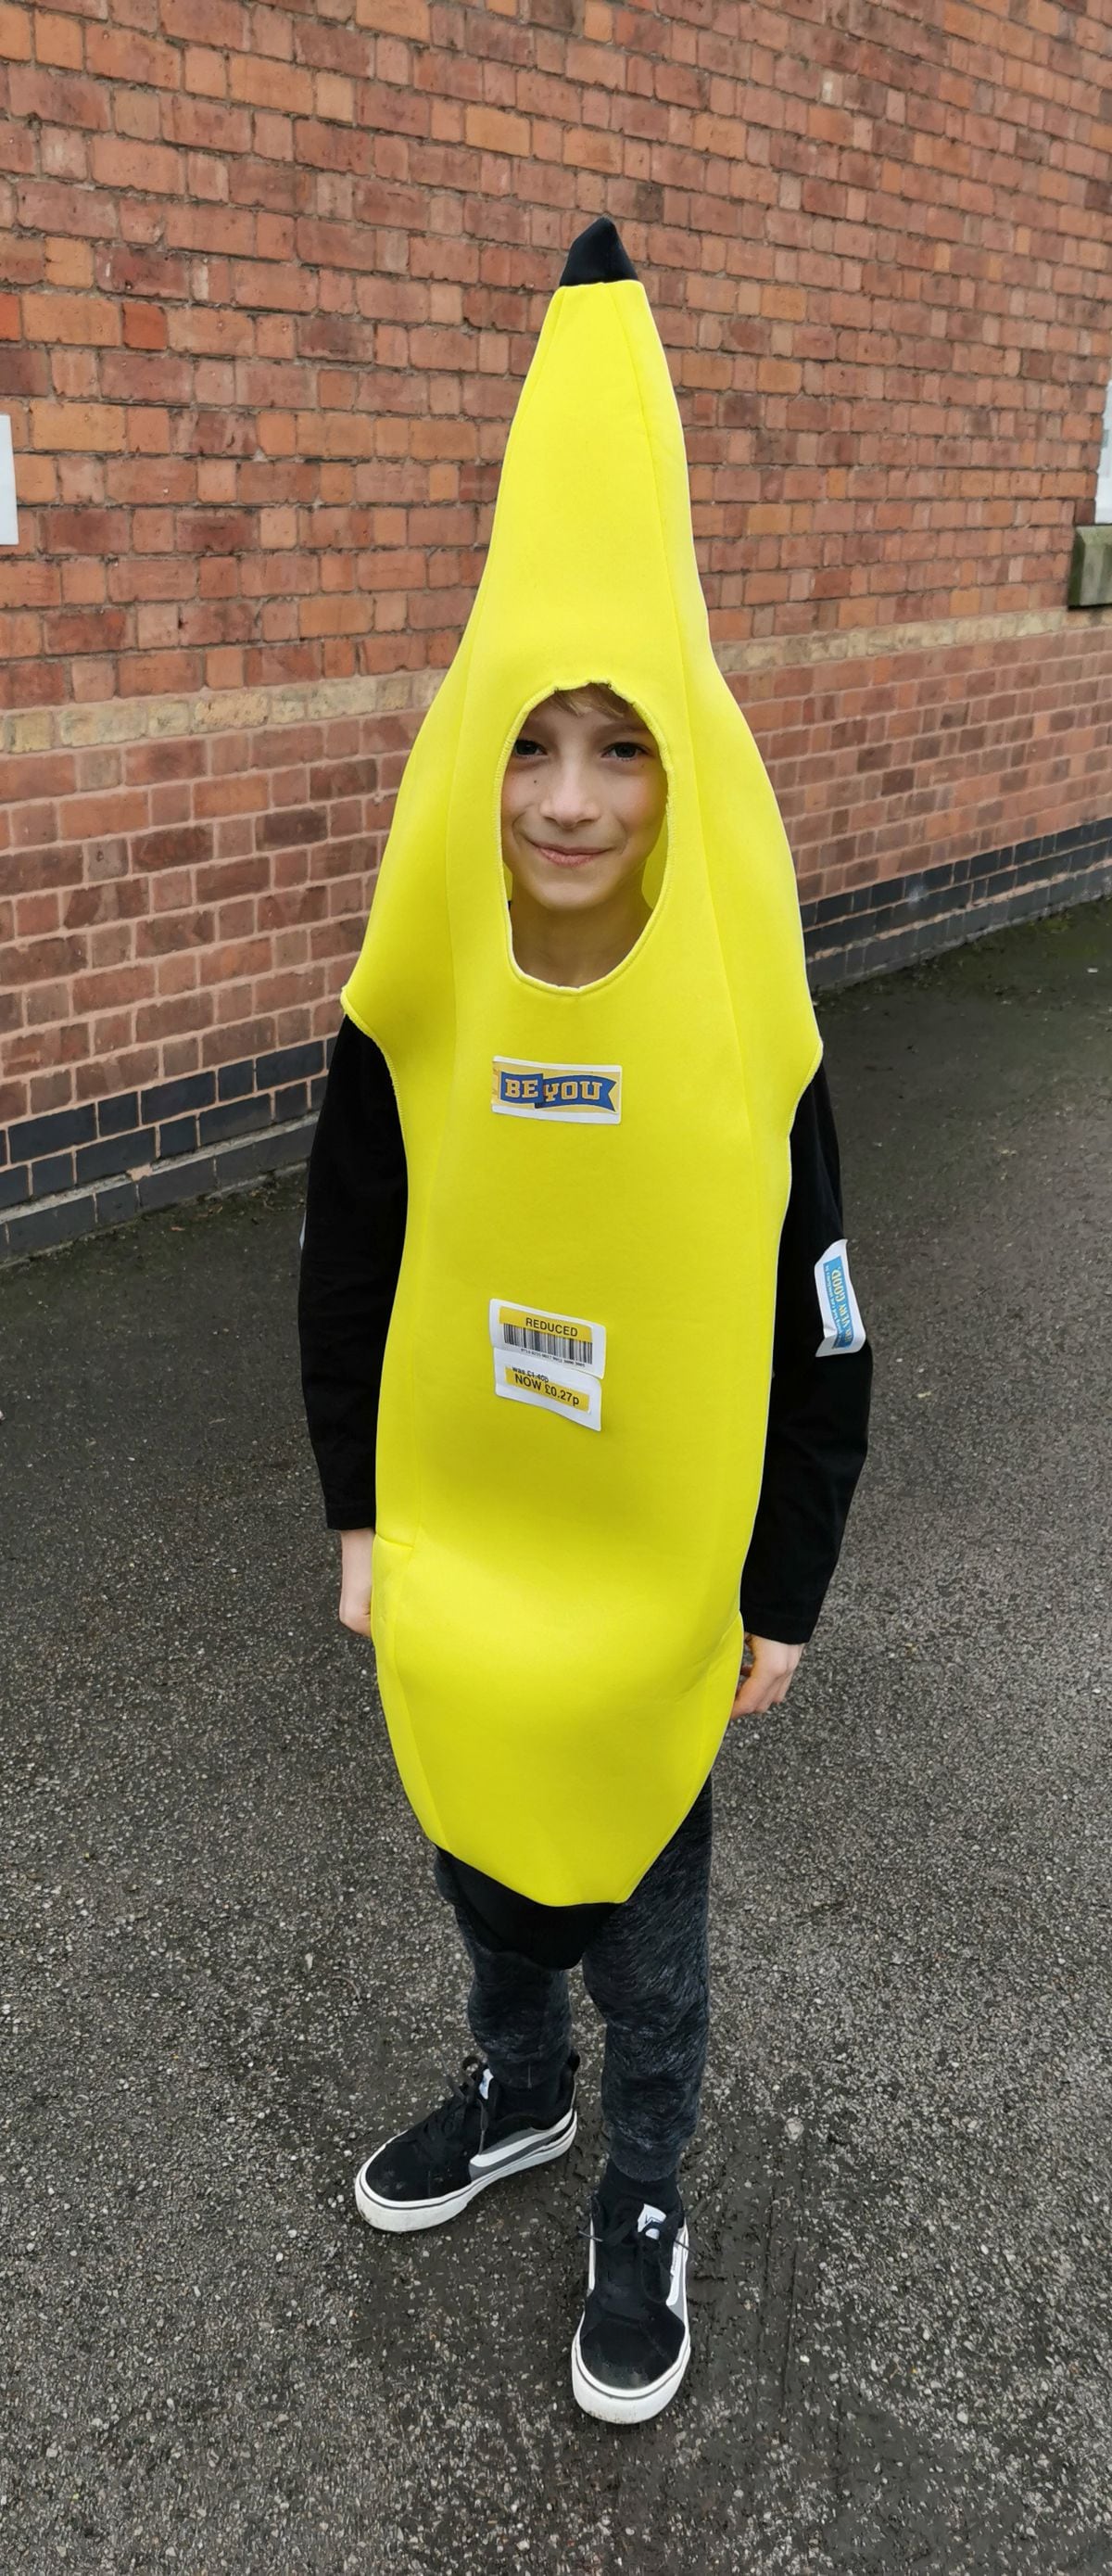 Max, from Newport dressed up as Bananna from The Day That Bananna Went Bad